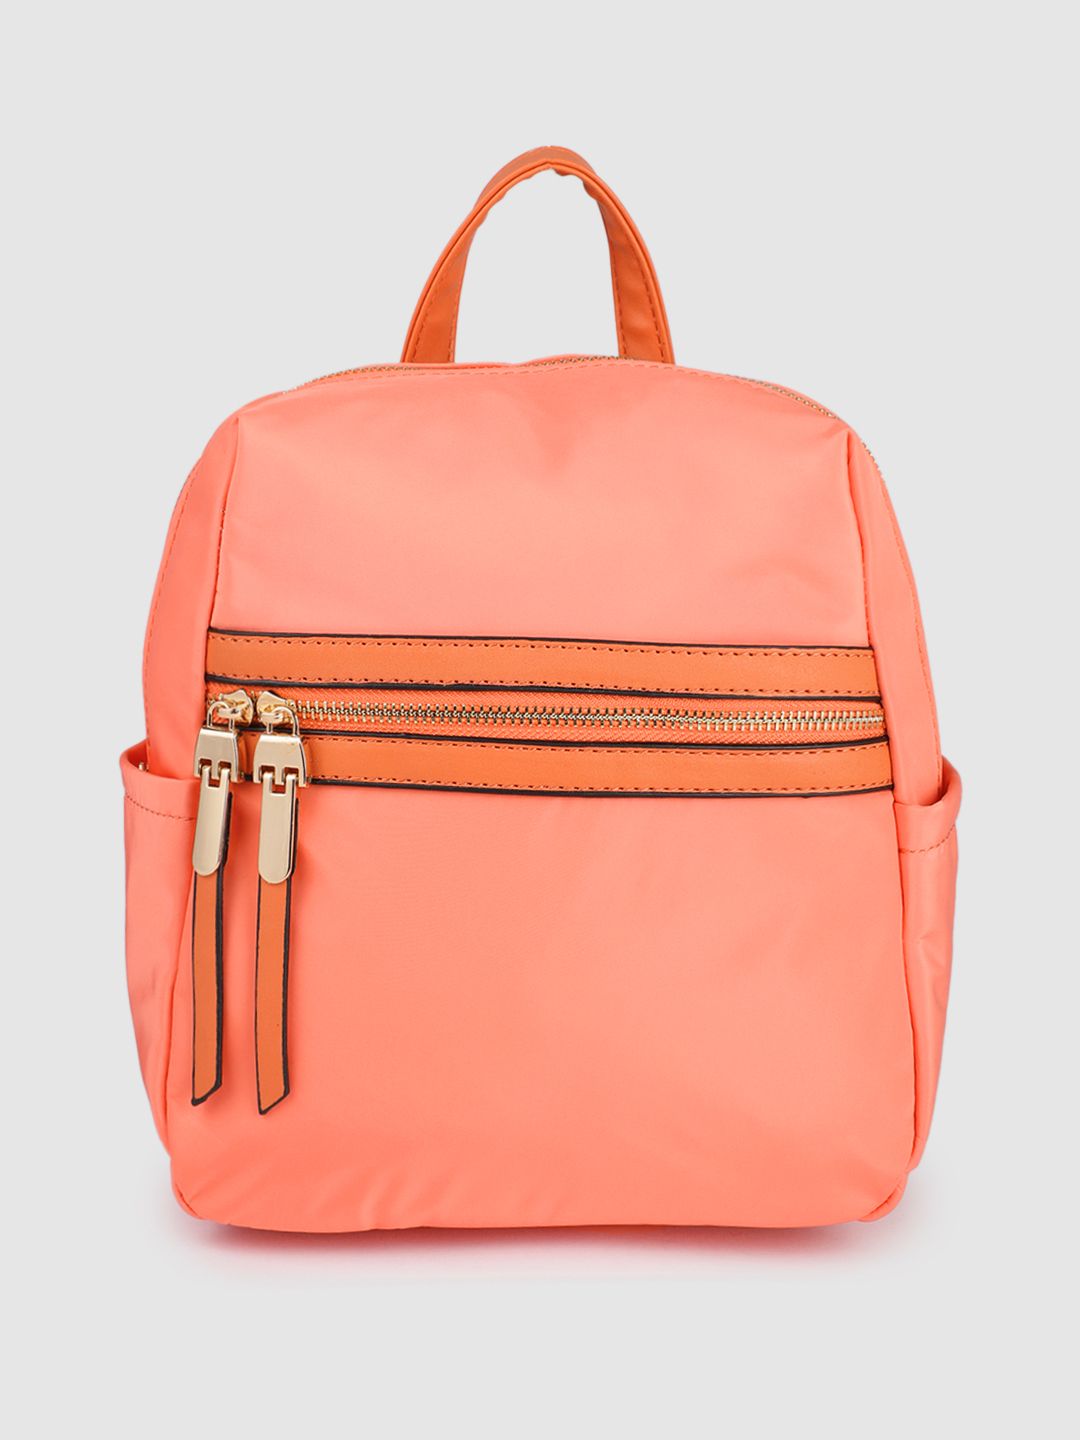 Allen Solly Women Peach-Coloured Backpack Price in India